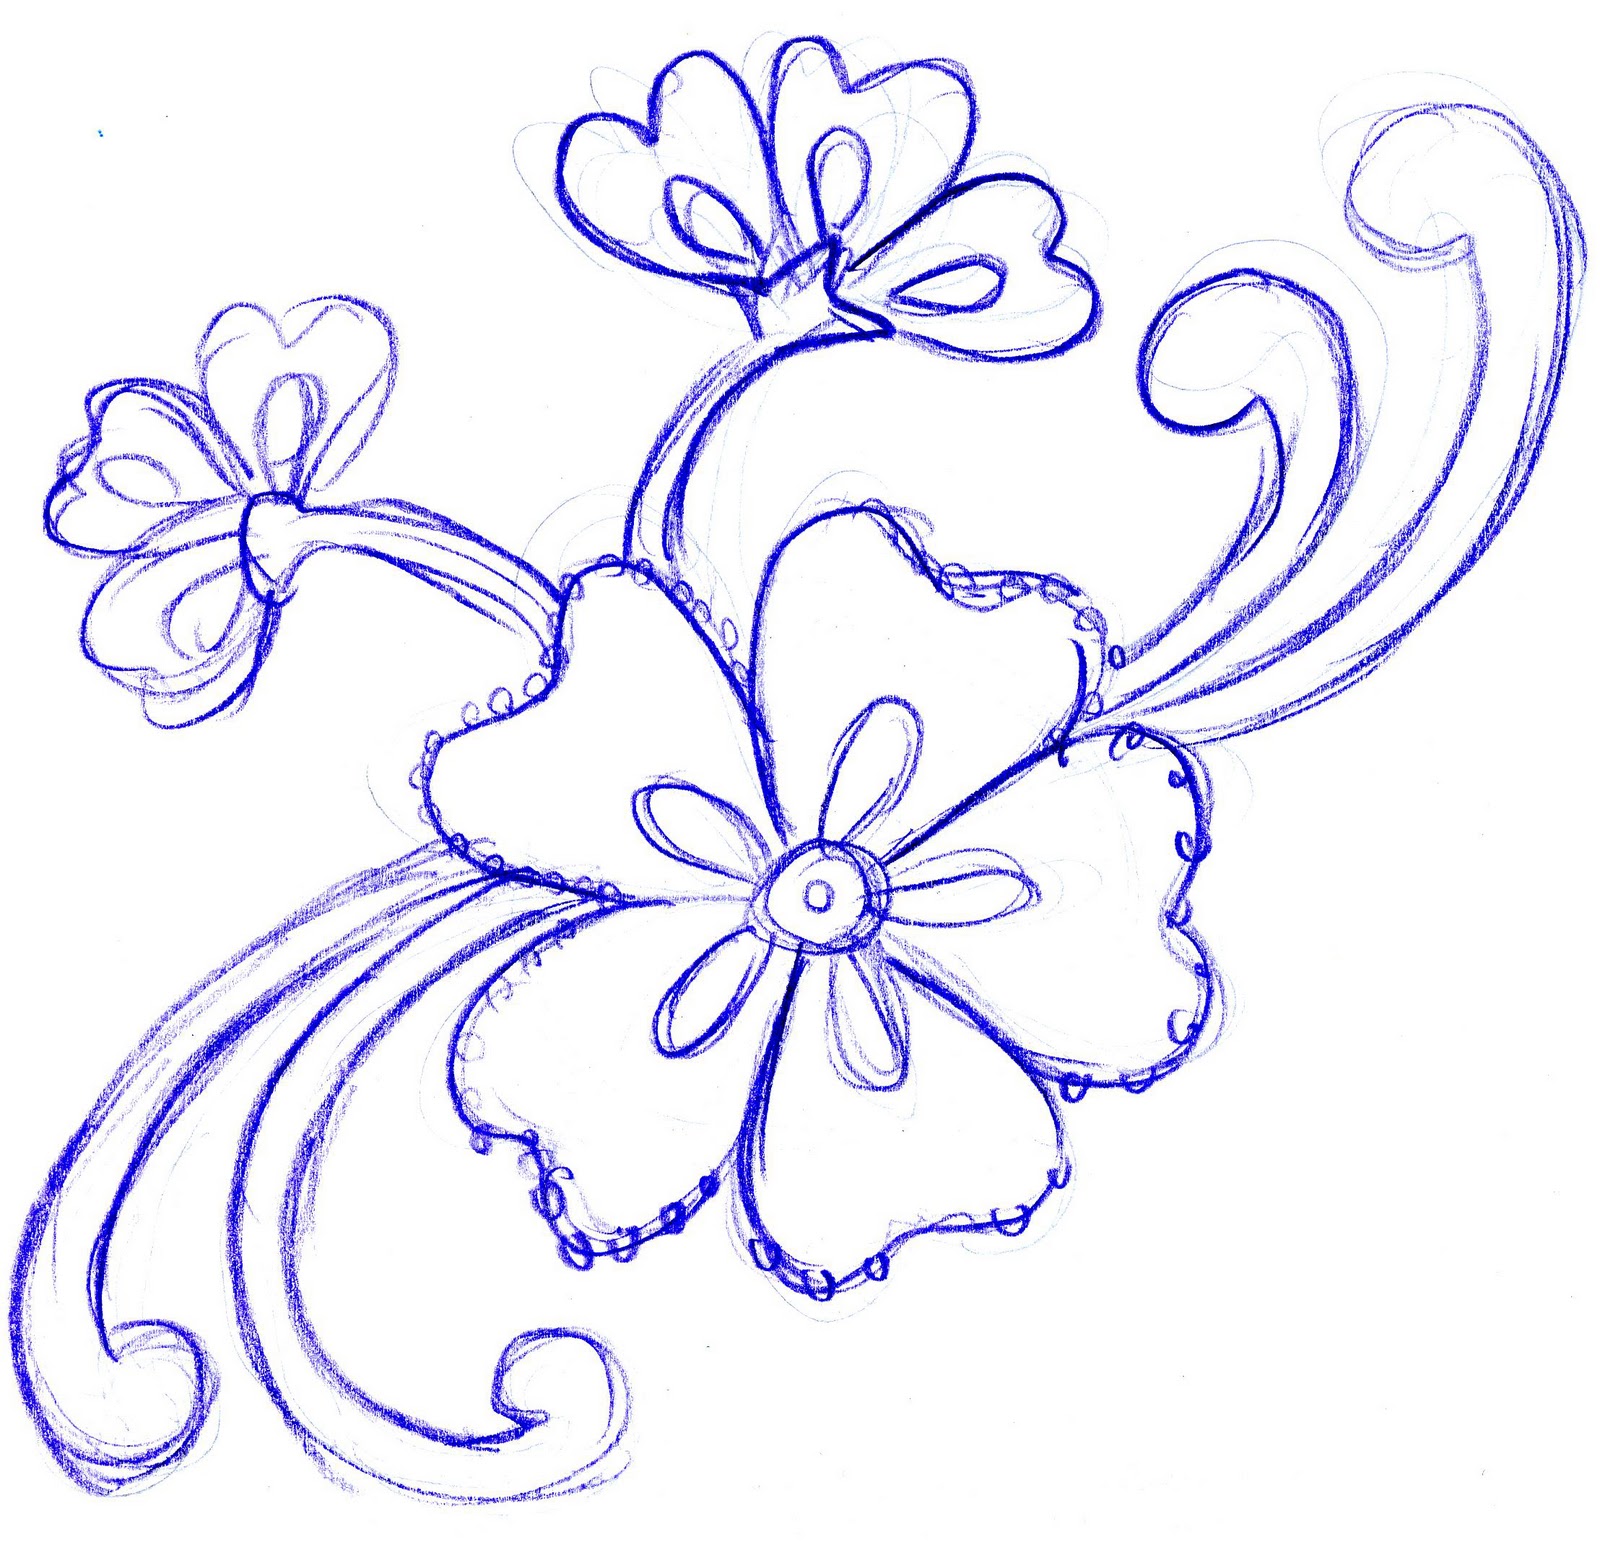 Hibiscus flowers drawing and sketch with line art on white backgrounds. |  CanStock